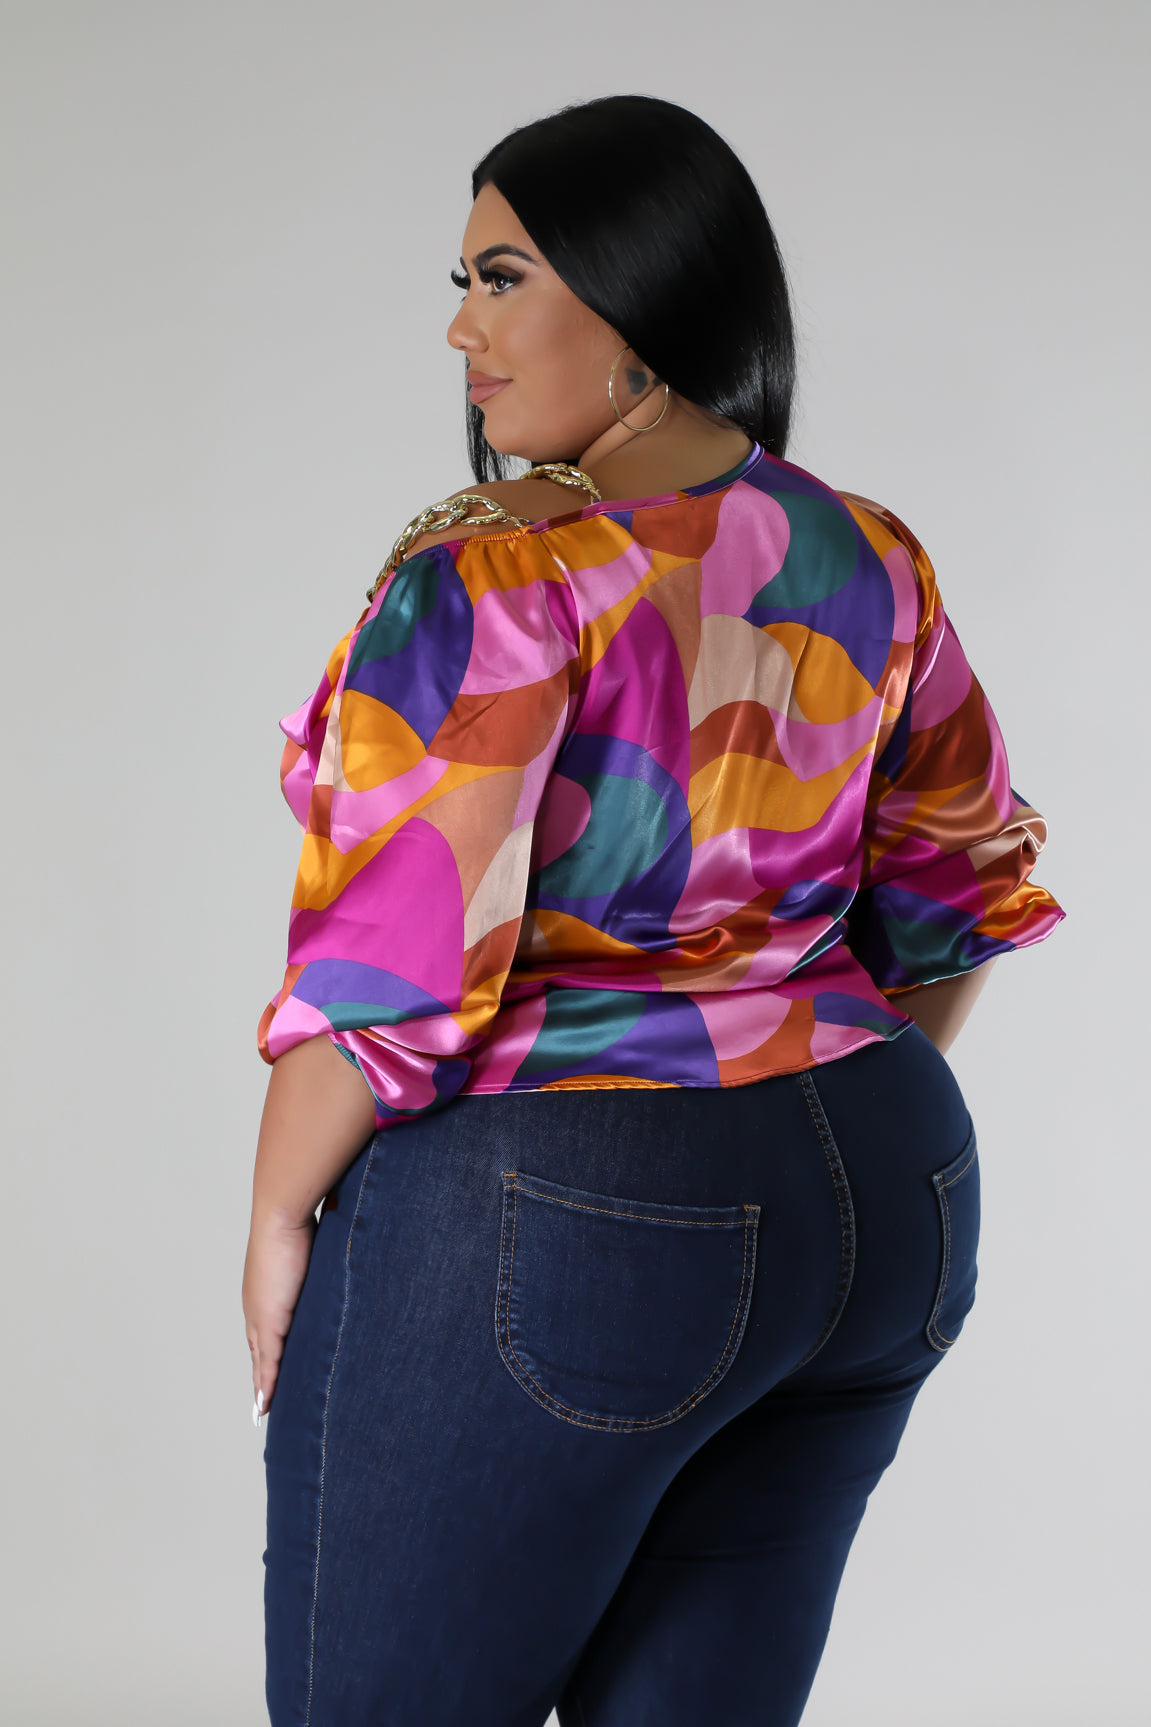 The Call You Mine Top - Plus Size